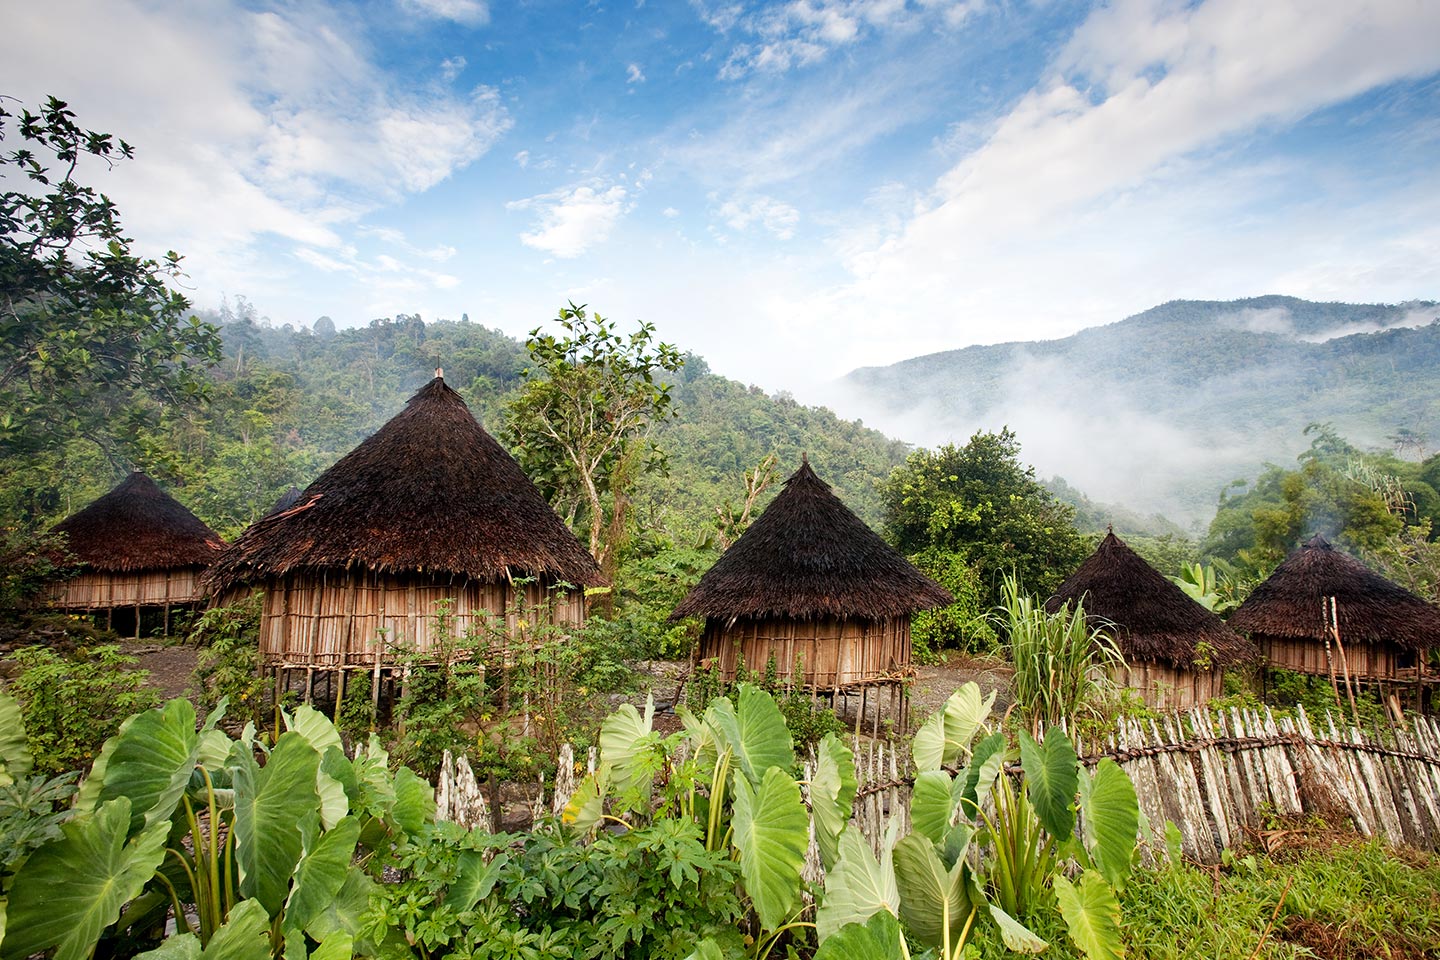 Scenic view of Papua New Guinea and a row of huts amid greenery.